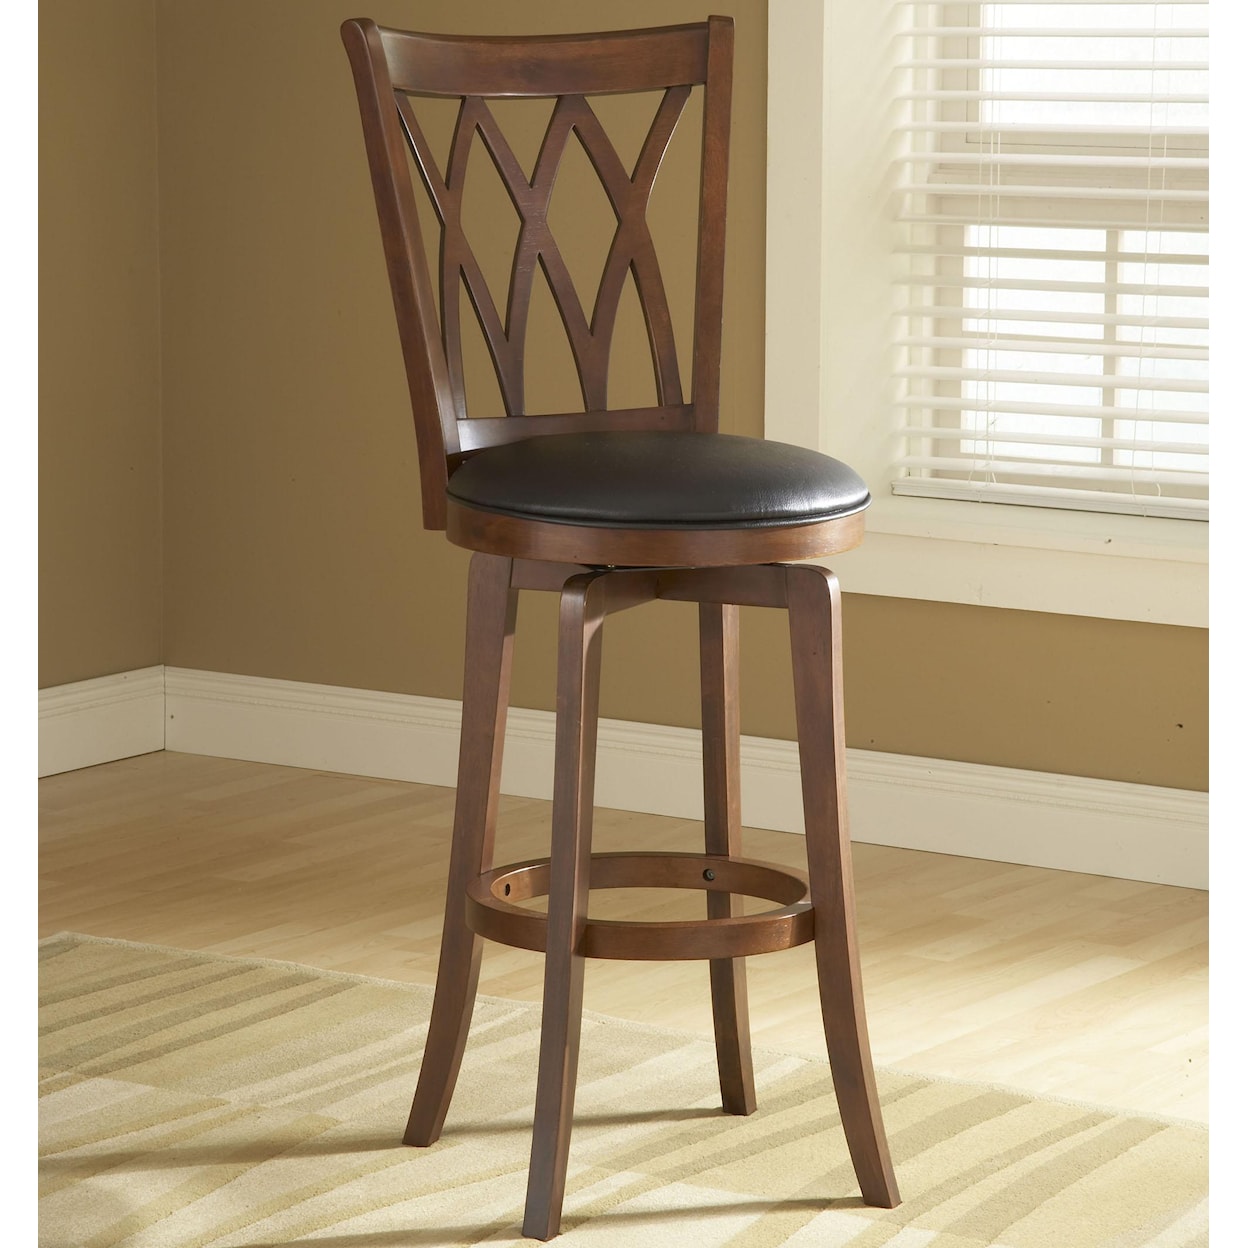 Hillsdale Wood Stools Mansfield Swivel Counter Height Stool